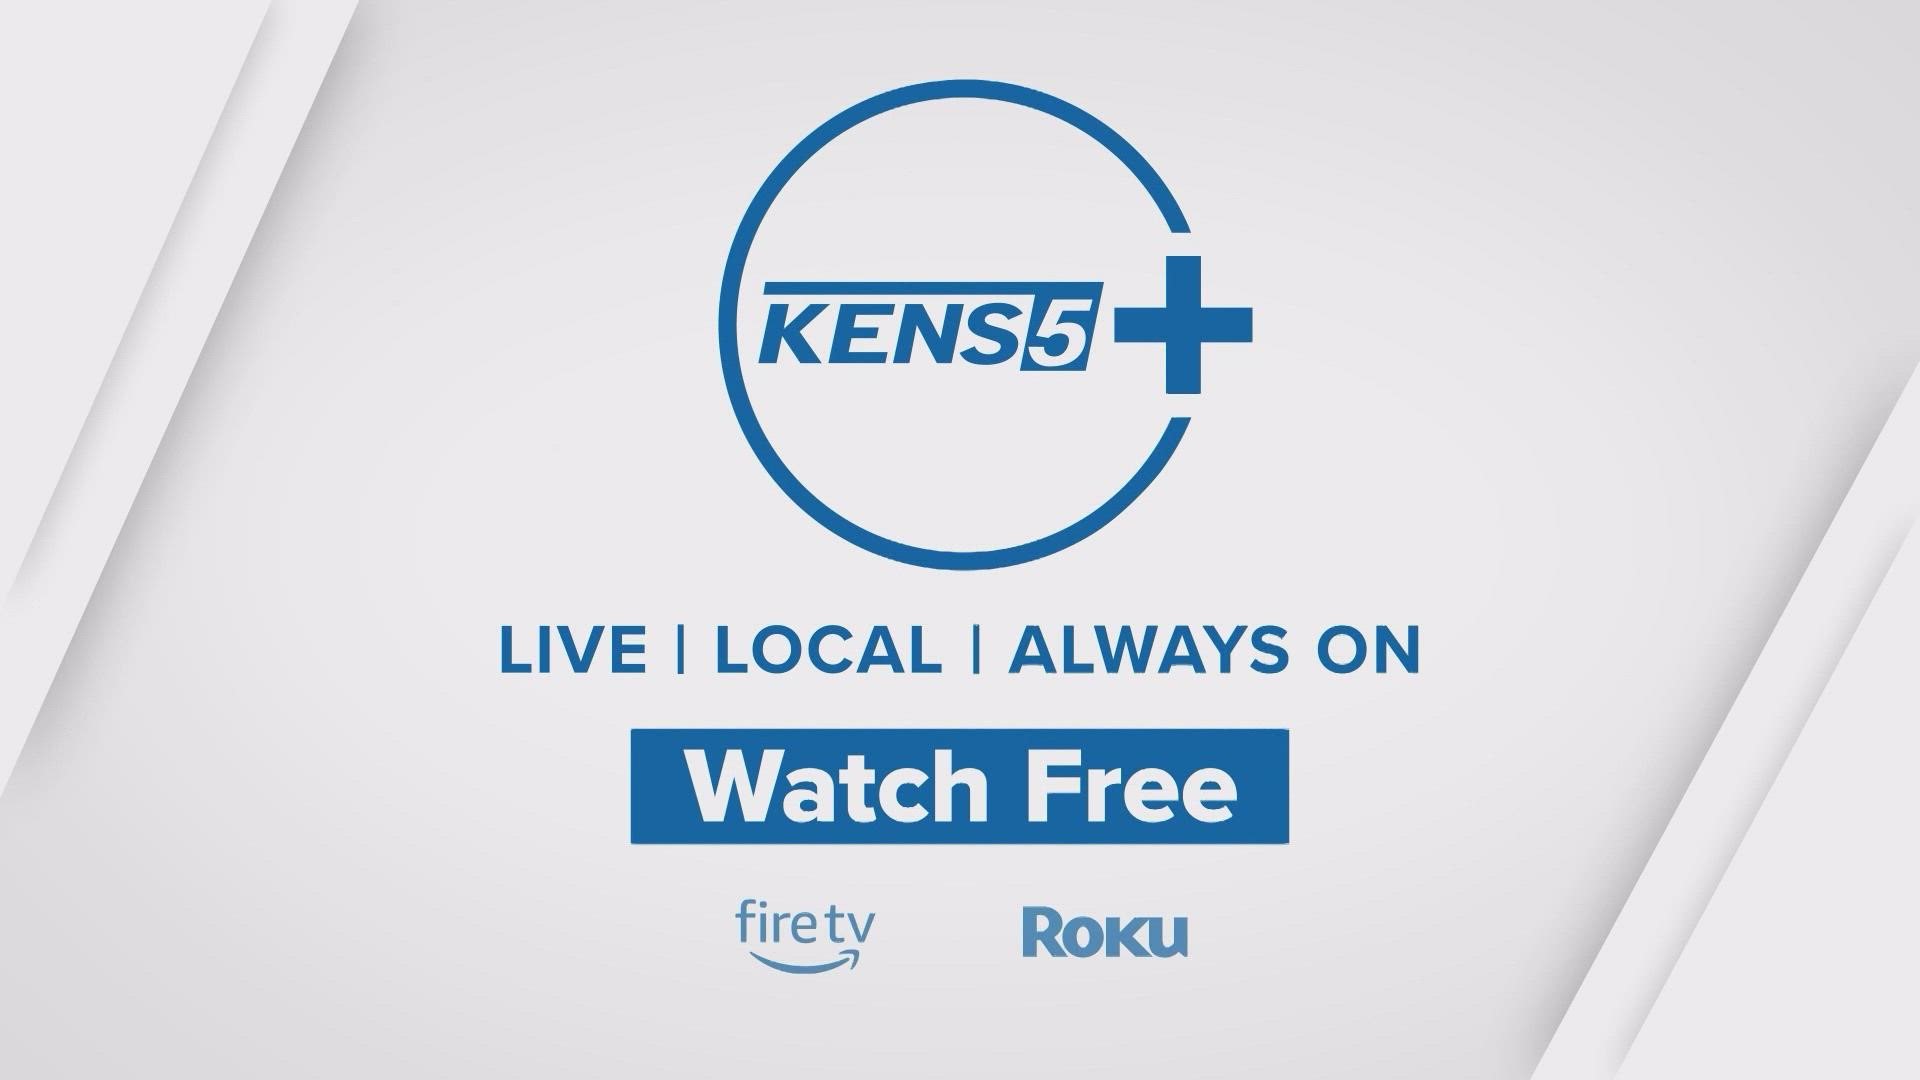 KENS 5+ is available for free on FireTV and Roku!